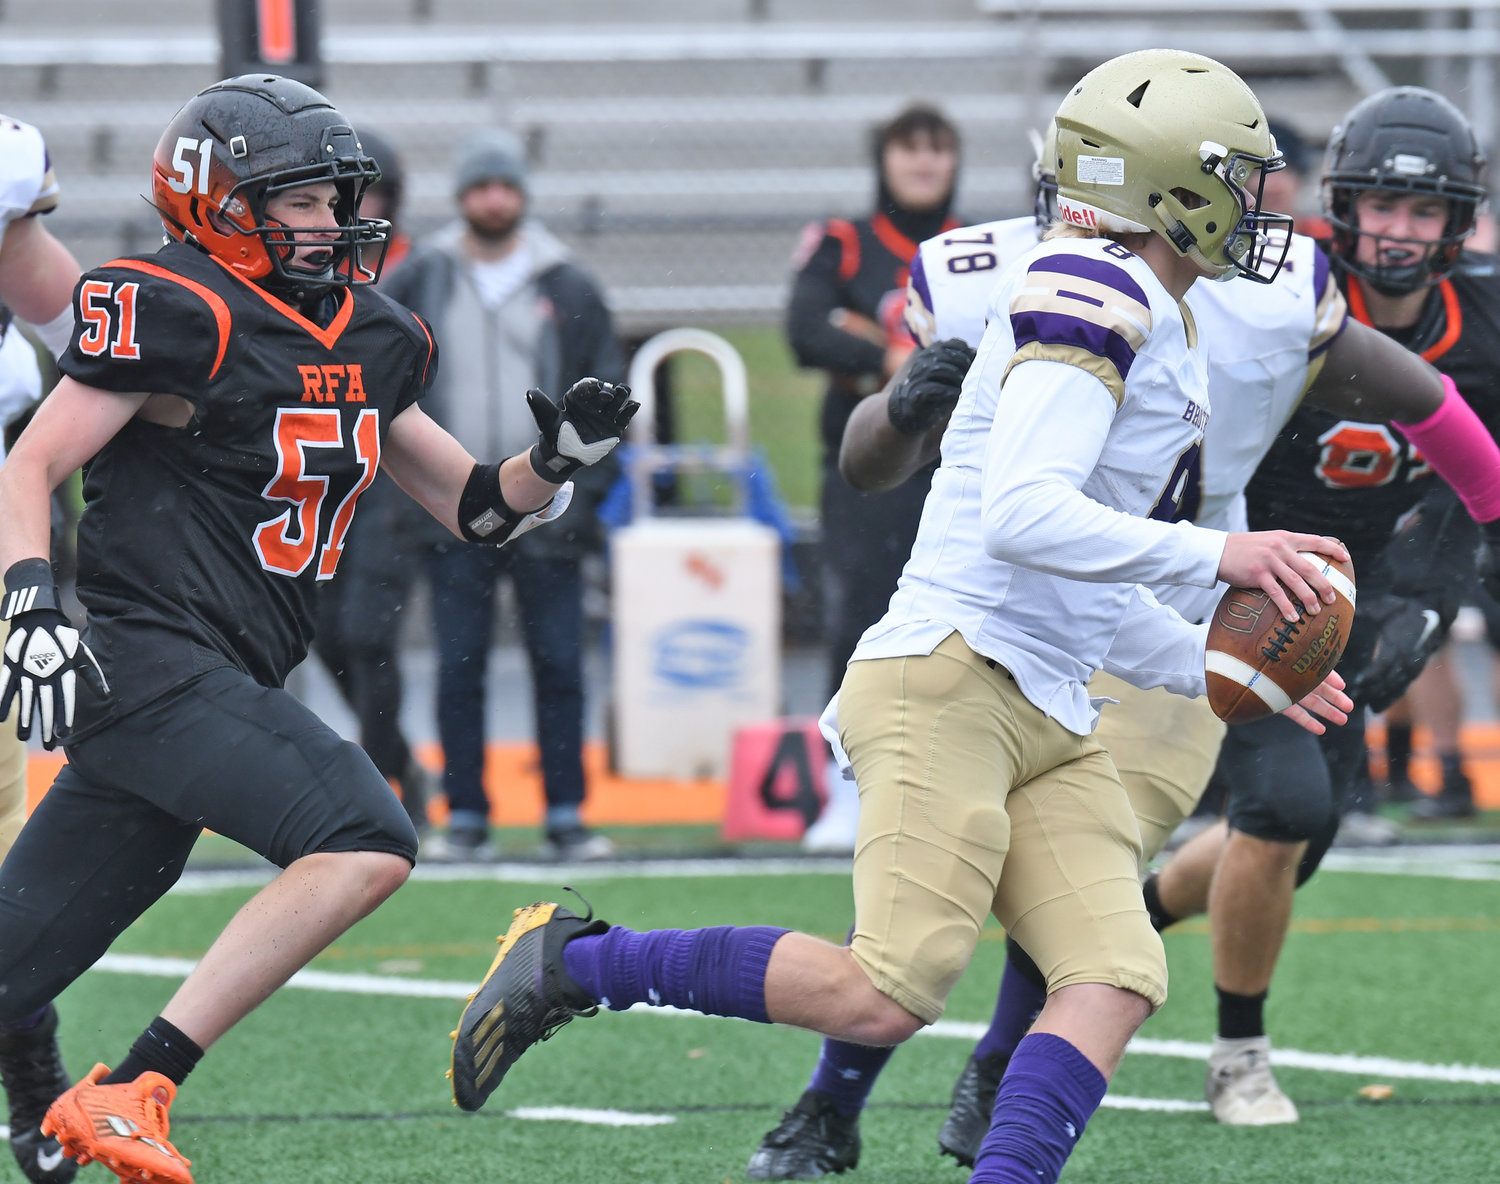 Rome Free Academy defensive lineman Kaiden Patnode chases Christian Brothers Academy quarterback Jordan Rae as he looks to throw during the first quarter Saturday afternoon at RFA Stadium. CBA won 69-21.